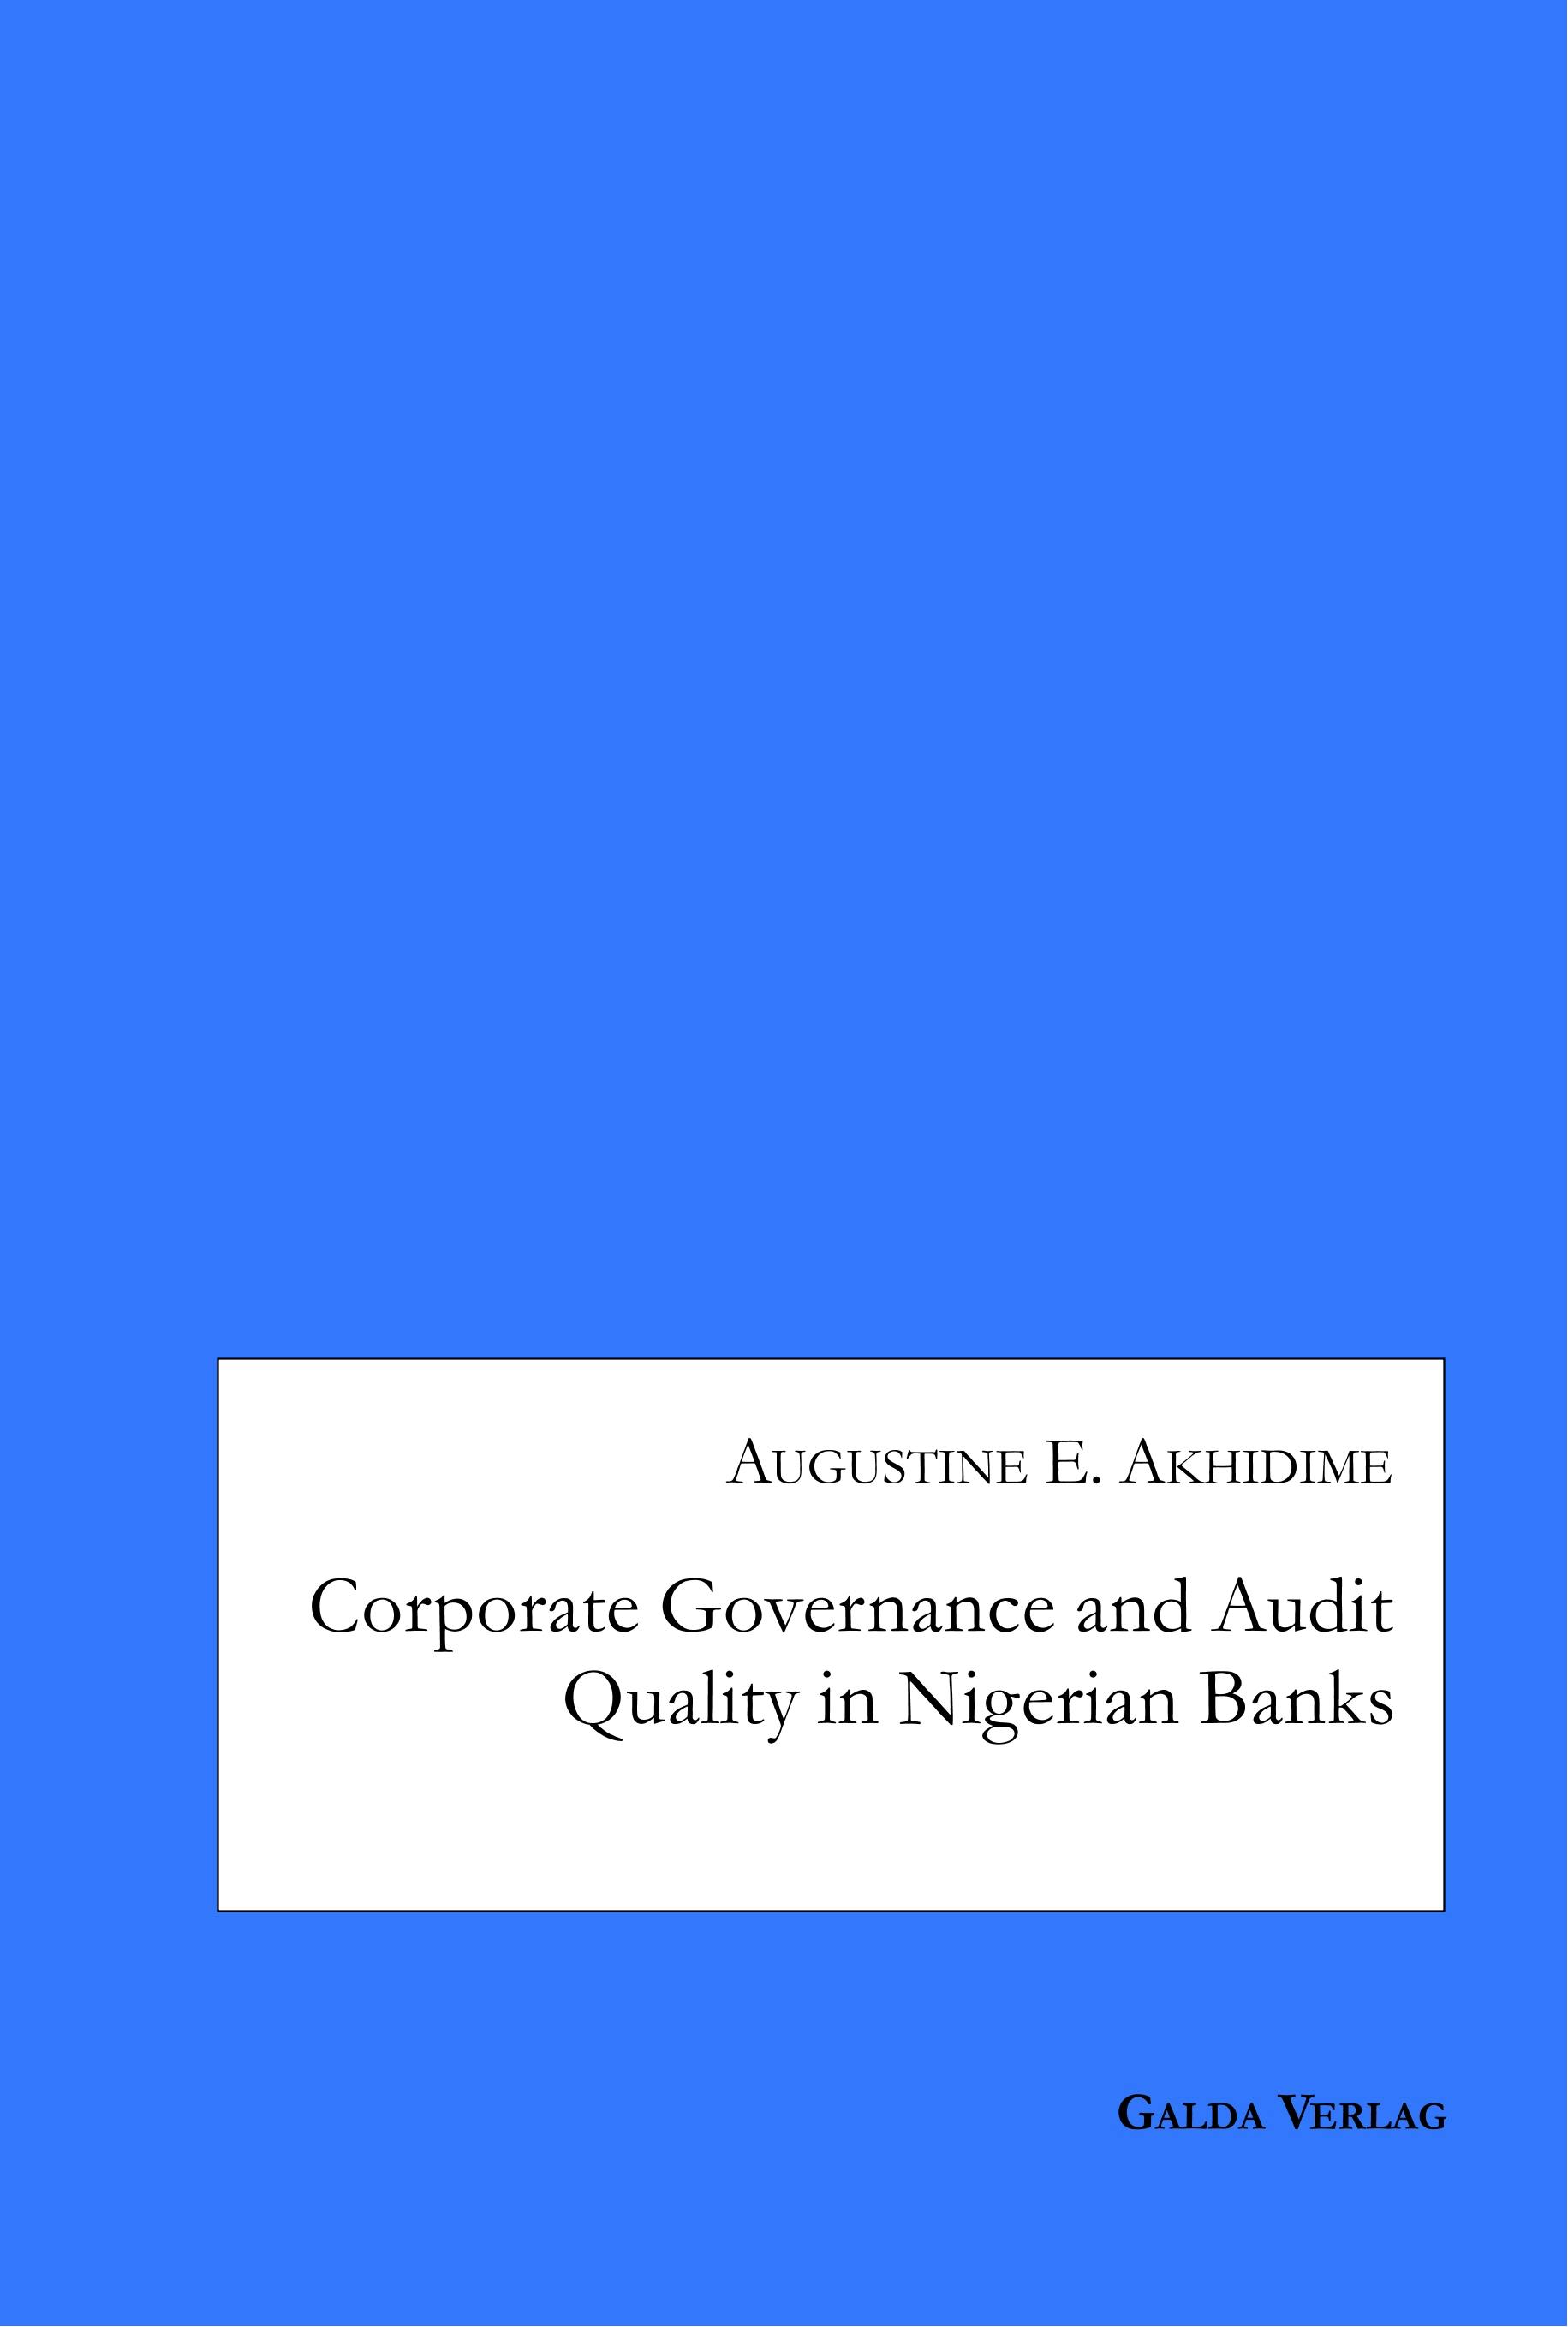 Corporate Governance and Audit Quality in Nigerian Banks - Augustine E. Akhidime